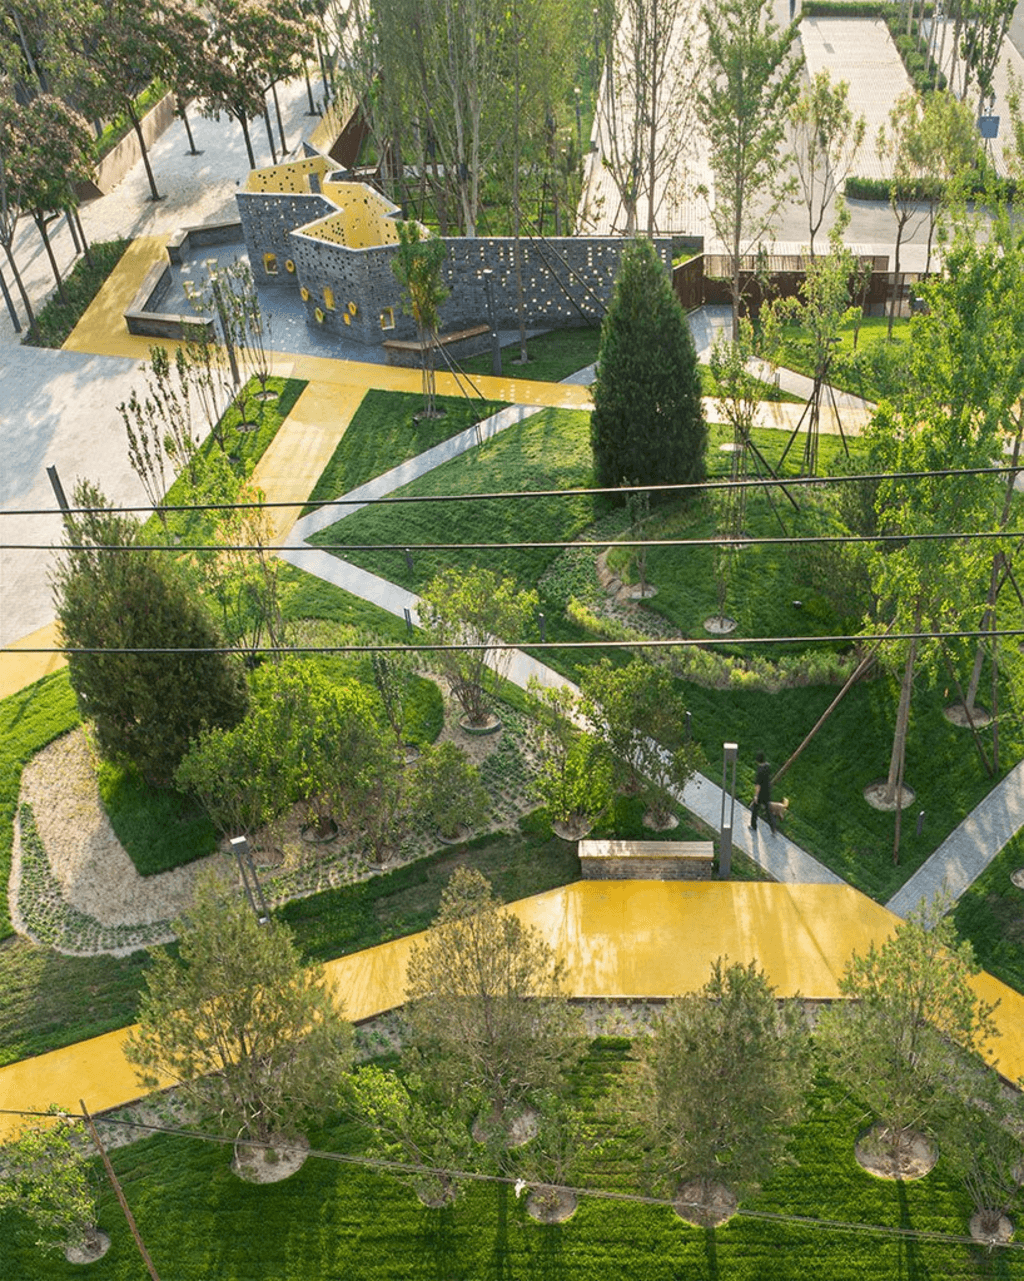 Urban Park Micro Renovation / Atelier cnS + School of Architecture, South  China University of Technology